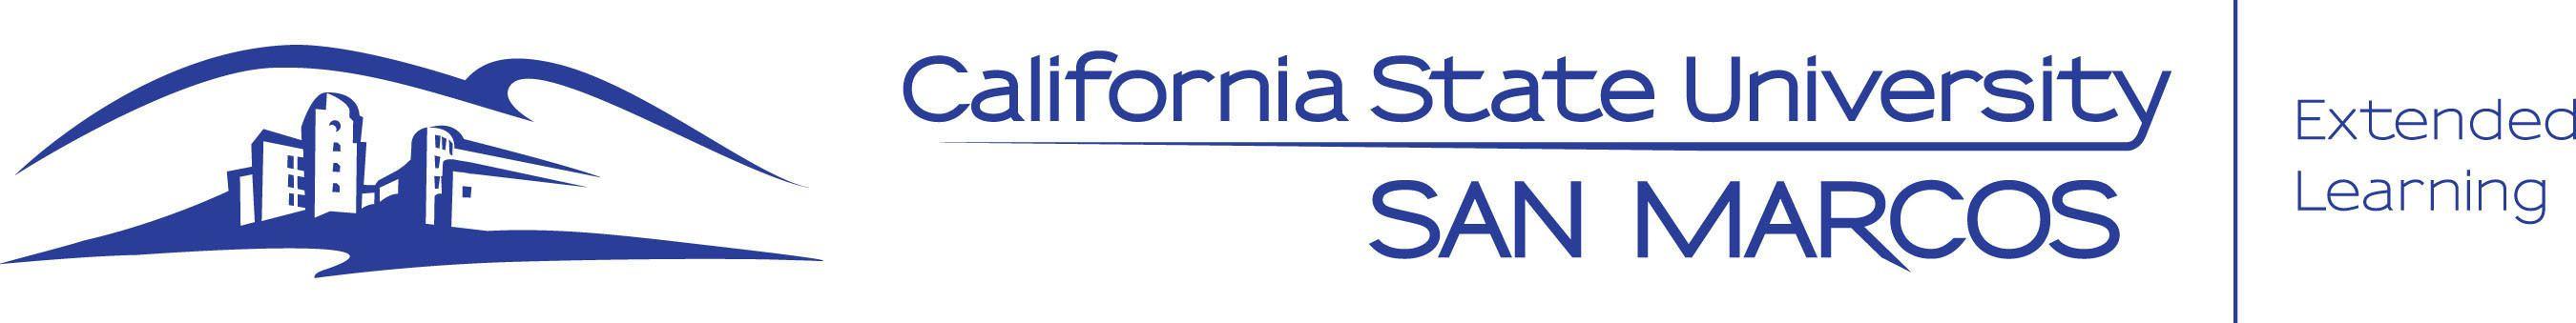 CSUSM Logo - California State University San Marcos Extended Learning Appoints